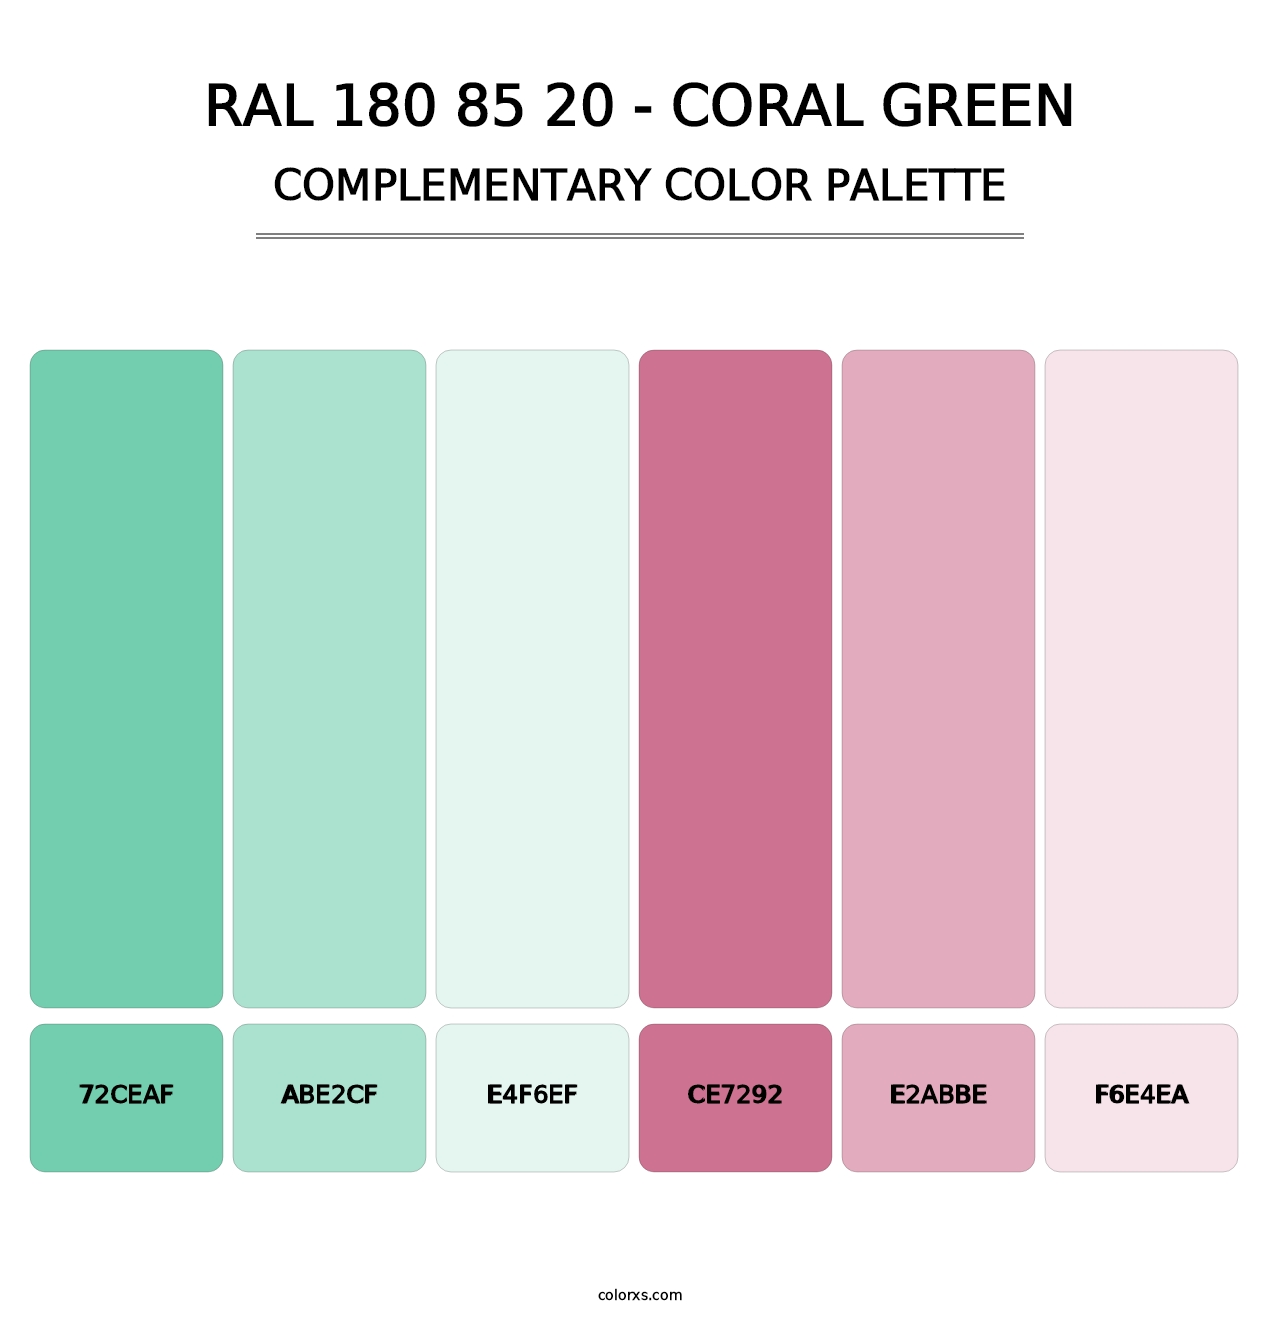 RAL 180 85 20 - Coral Green - Complementary Color Palette